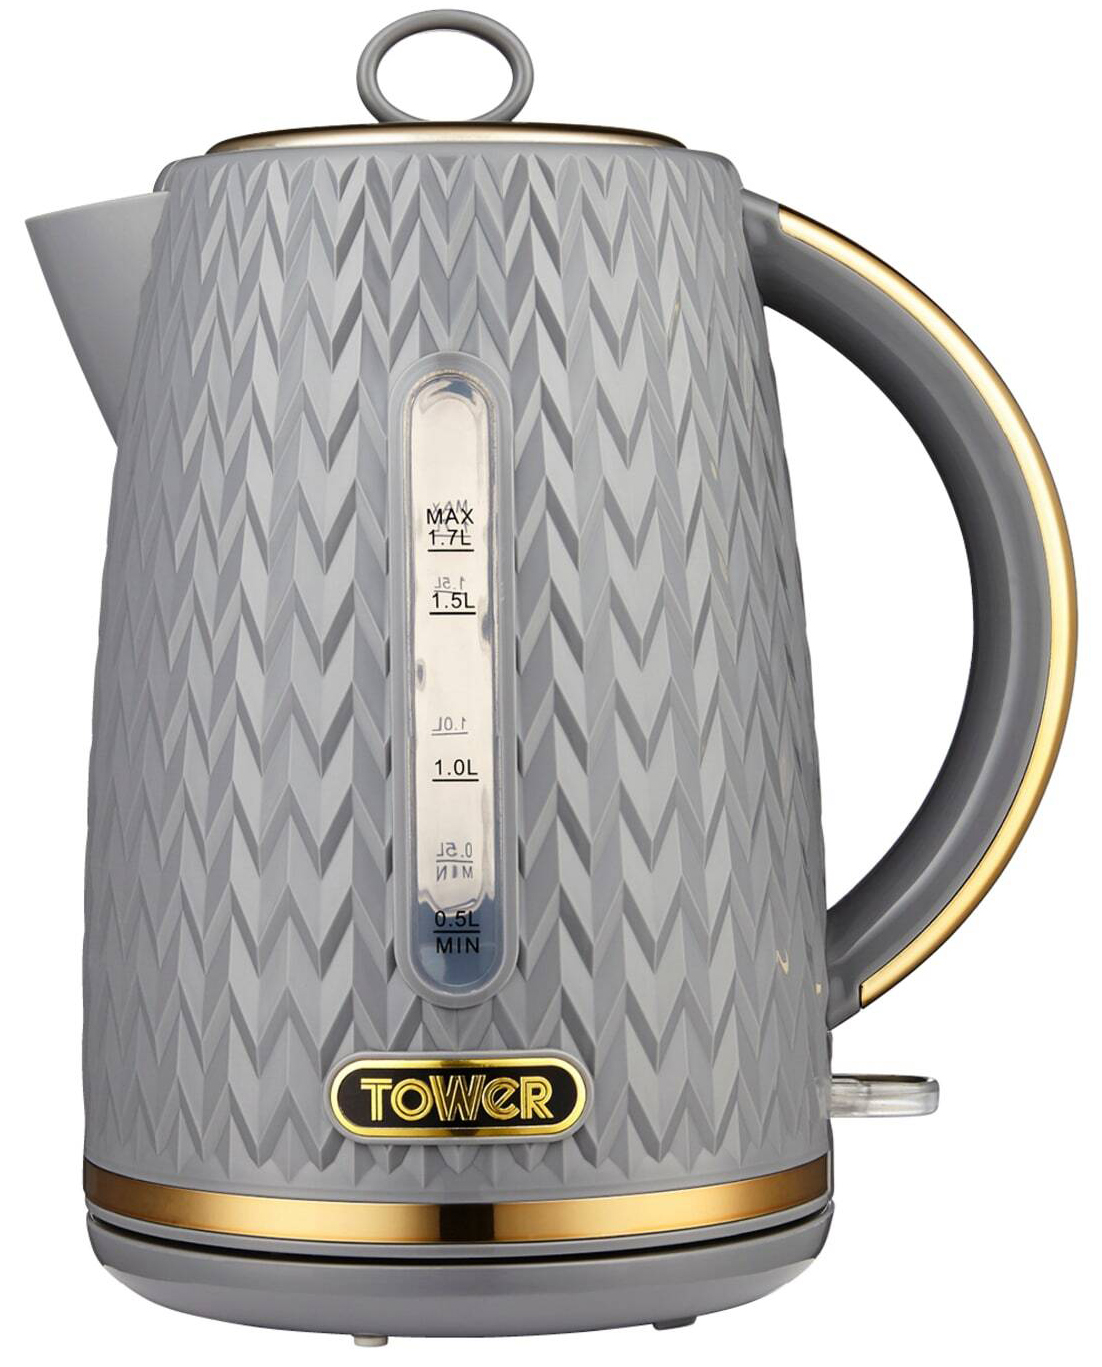 Tower Empire 3KW 1.7L Kettle - Grey